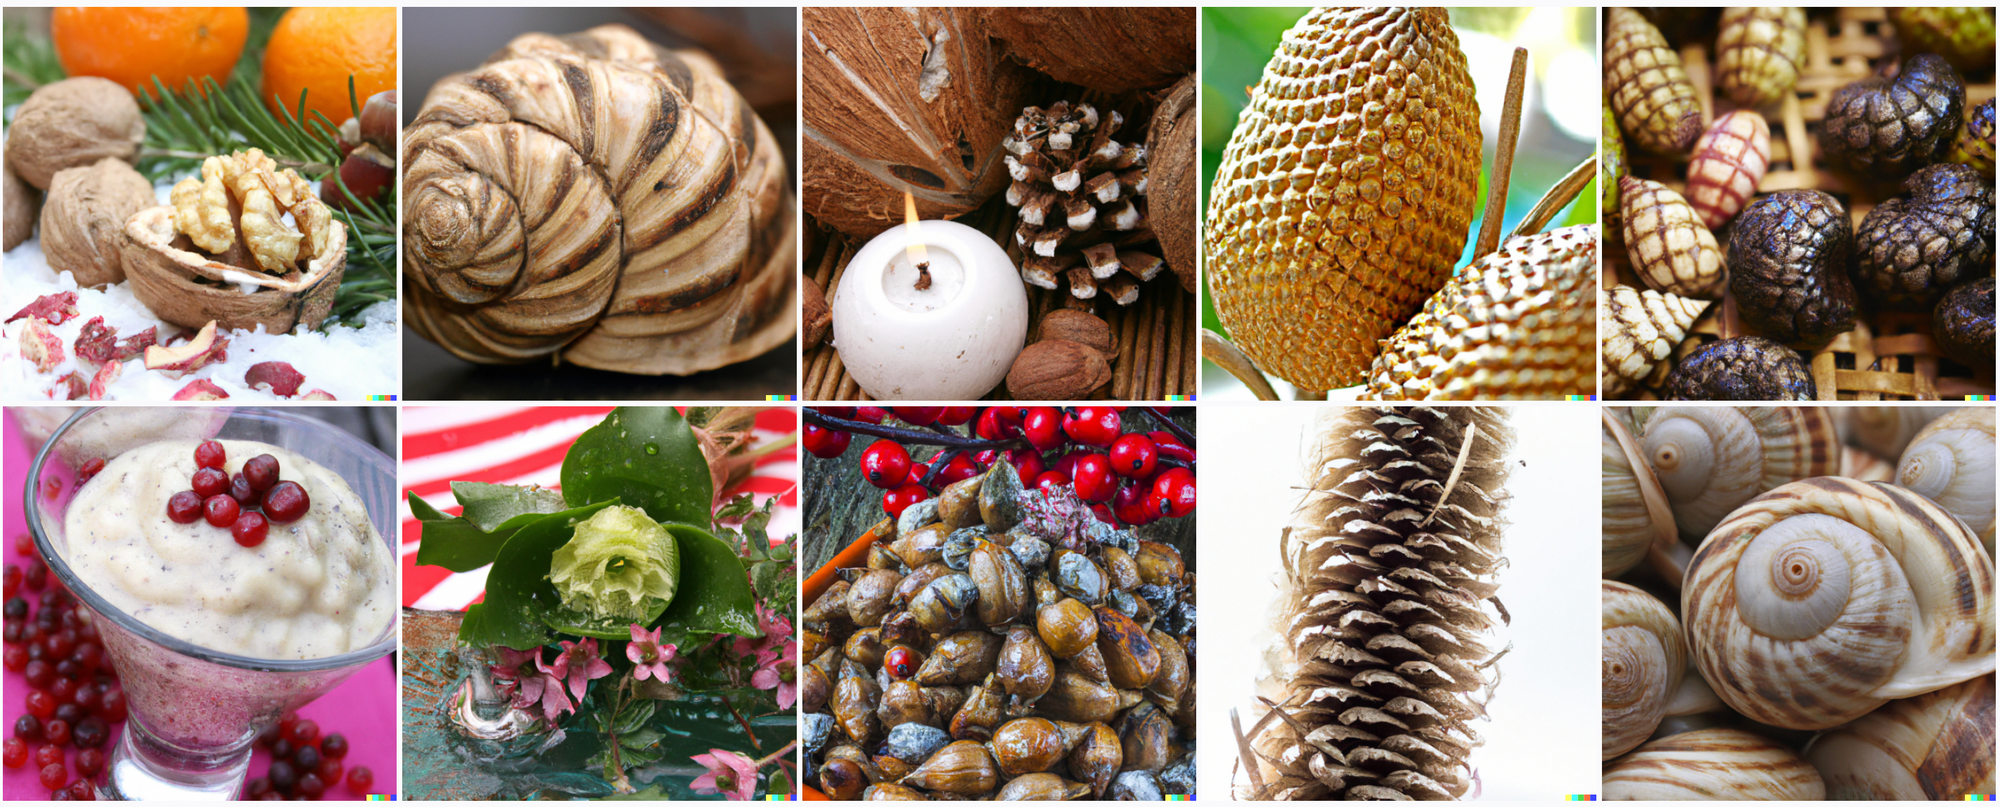 Three images are of snails, two are of pinecones, one might be a durian, another is a walnut, another might be a combination between an almond and a hand grenade